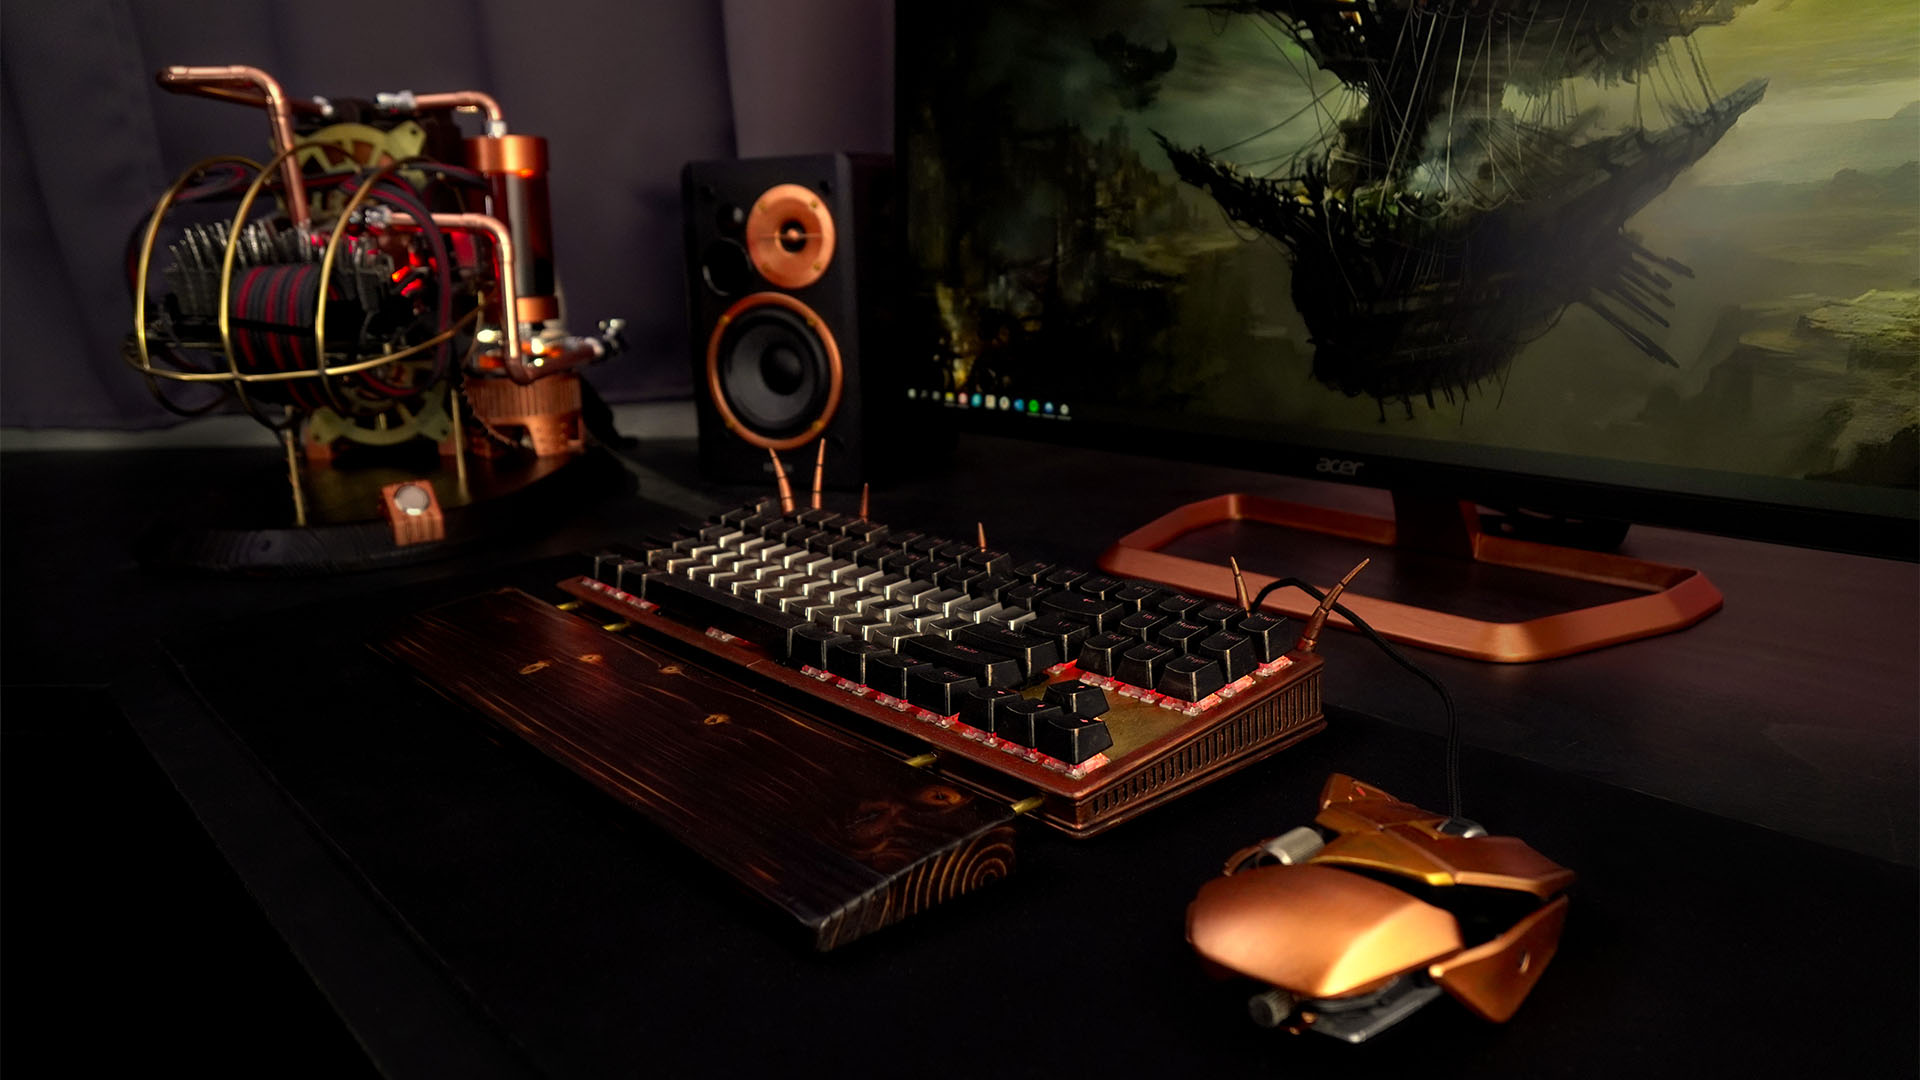 The steampunk PC build together with a monitor and custom keyboard